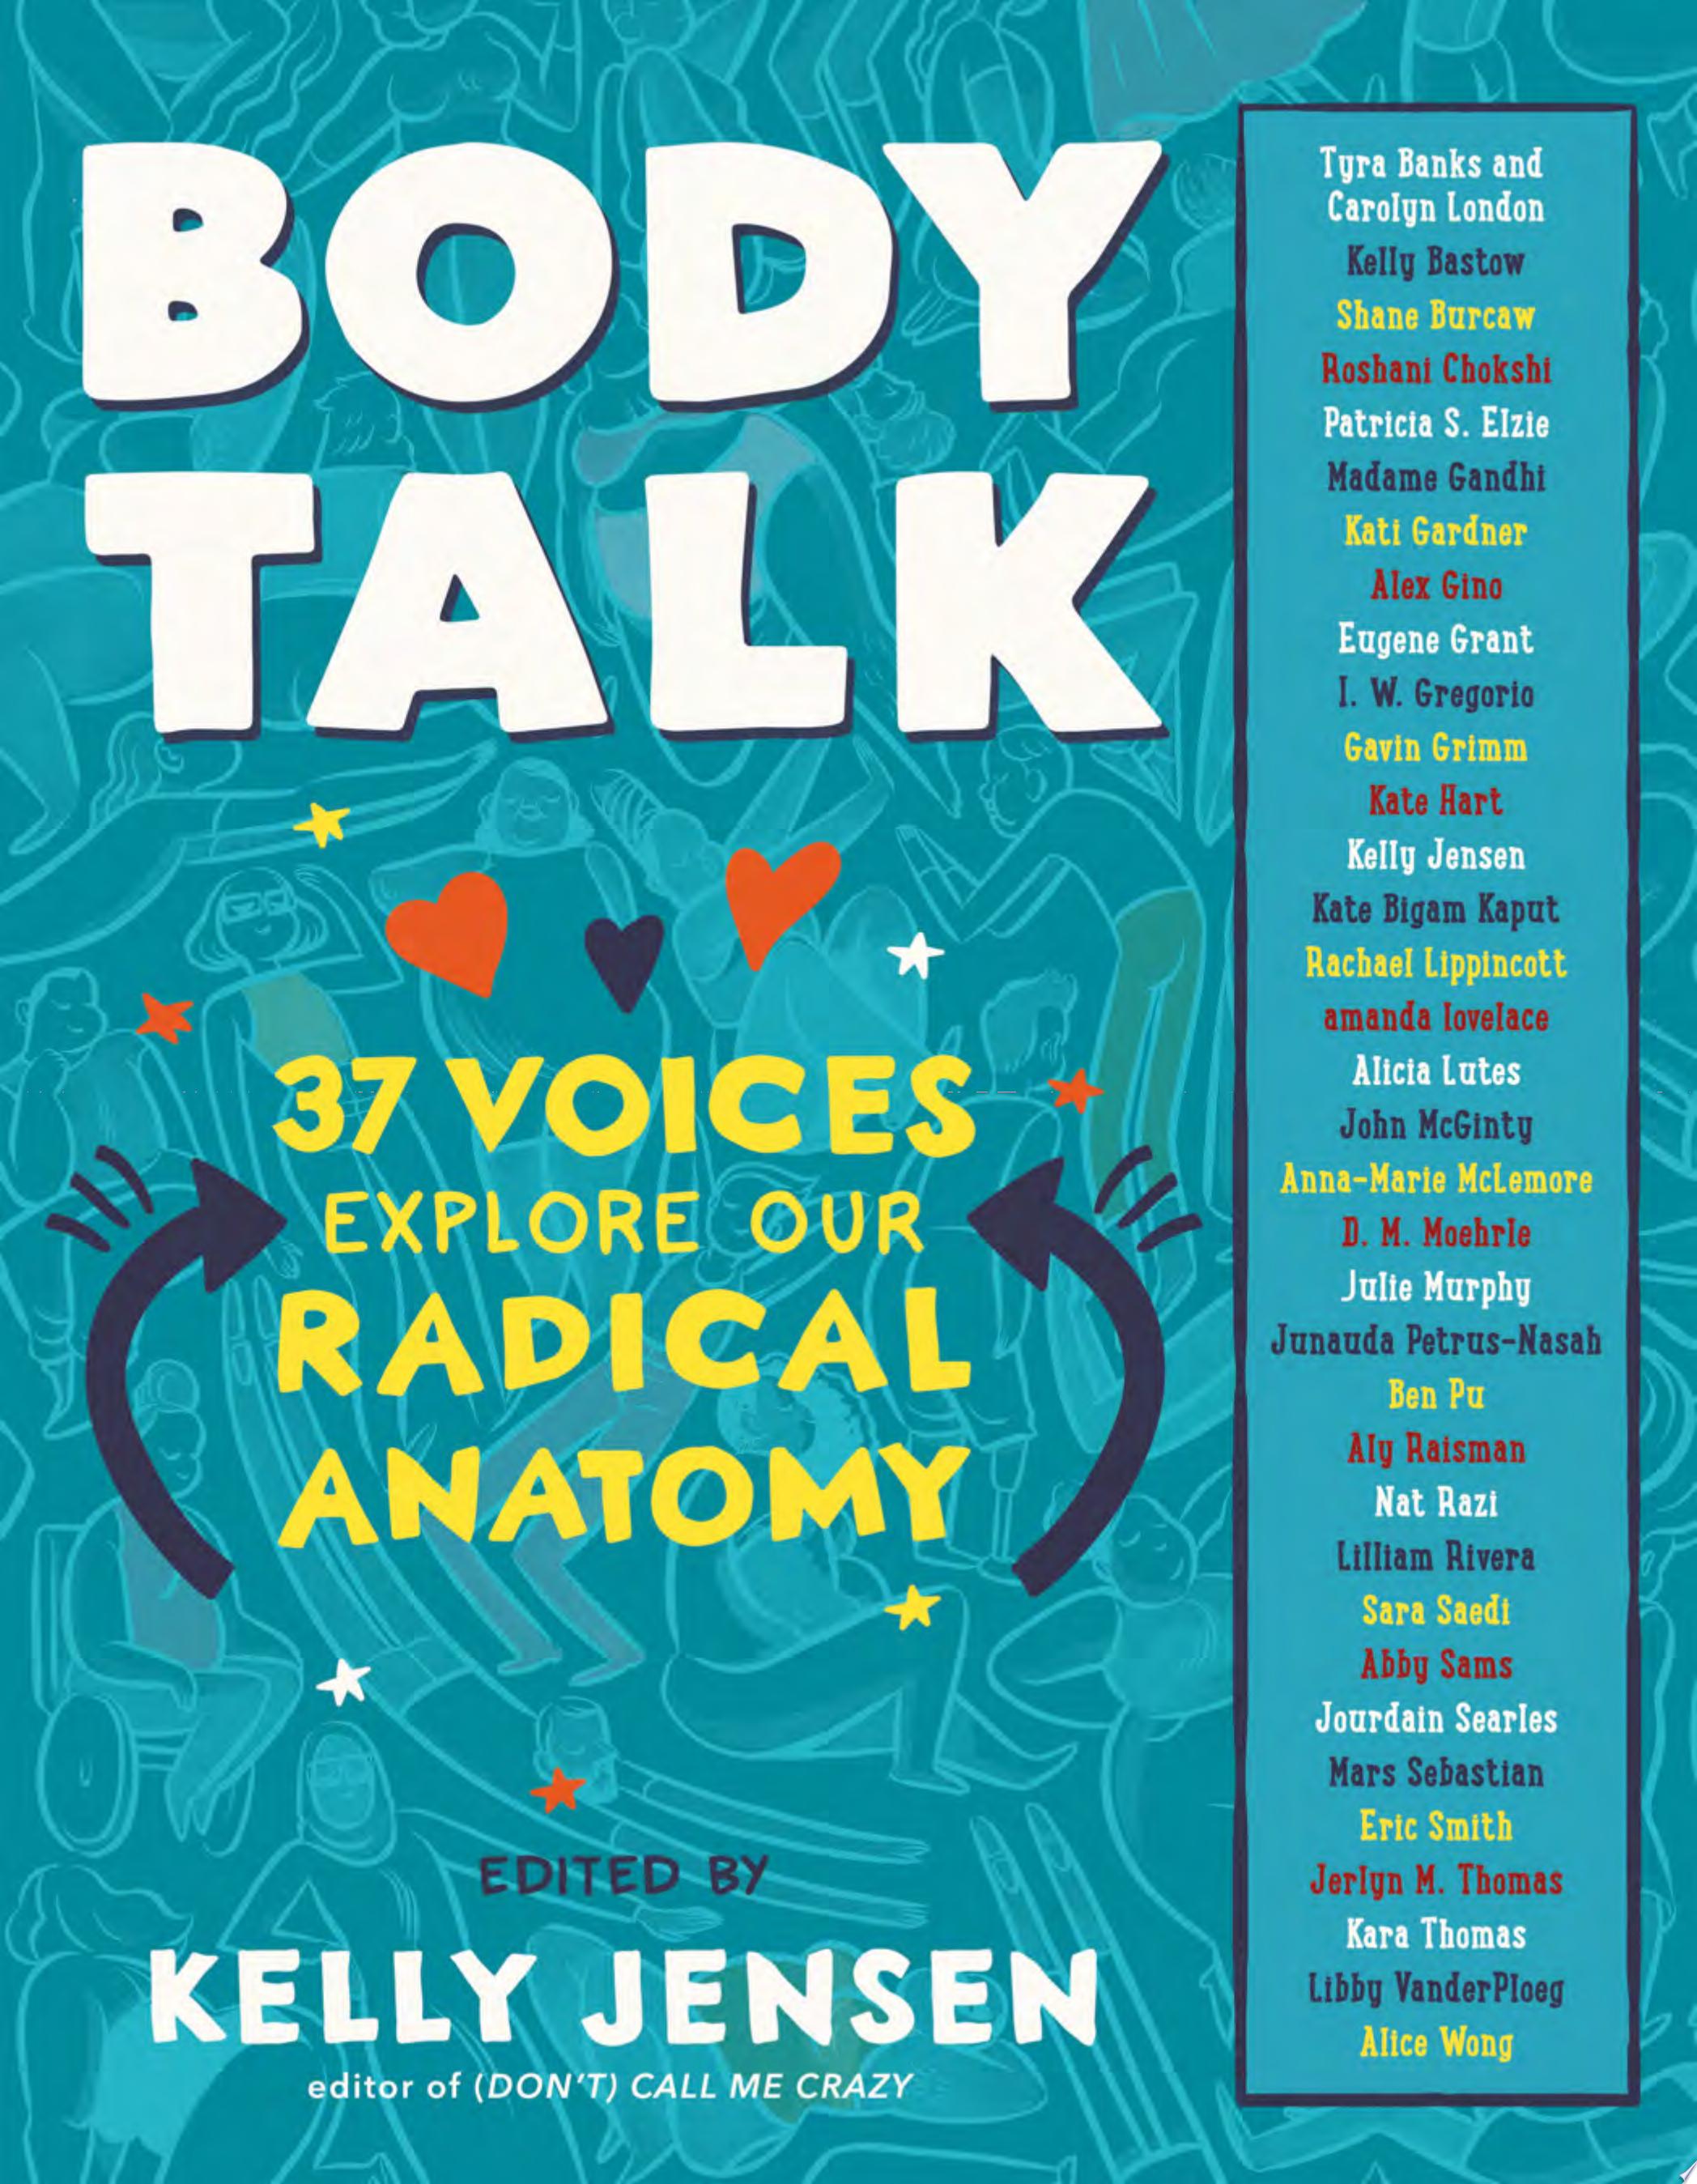 Image for "Body Talk"